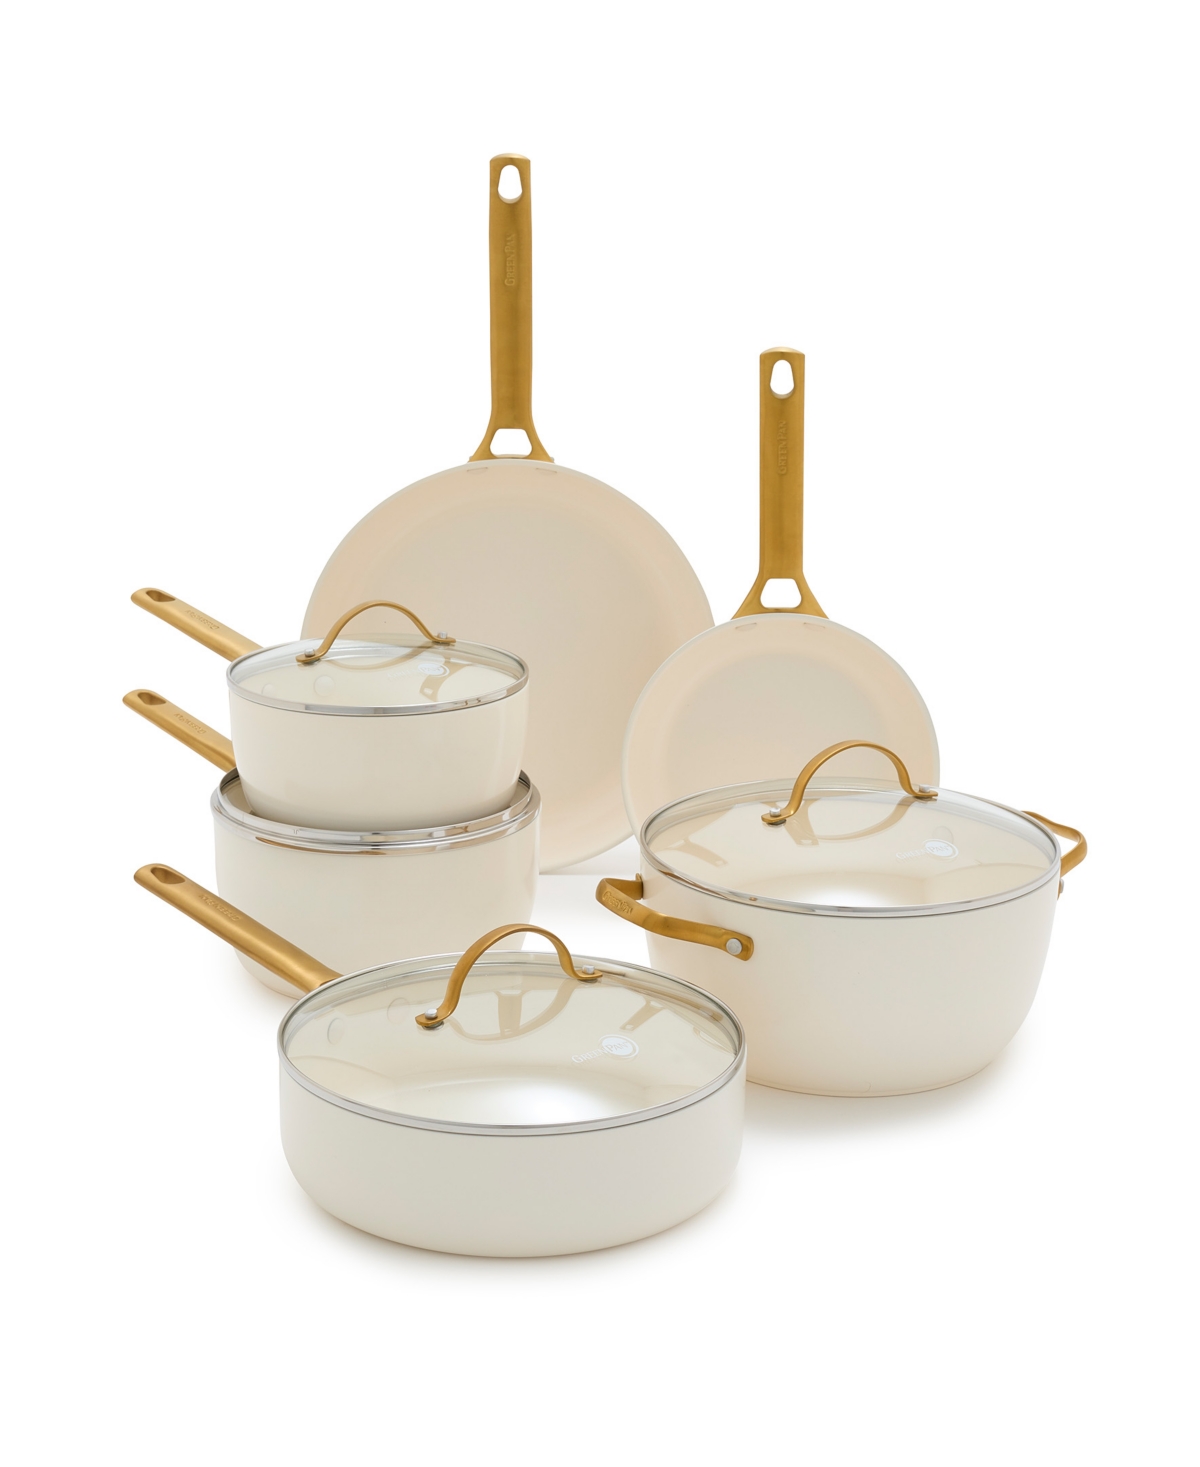 Greenpan Reserve Hard Anodized Aluminum, Stainless Steel 10 Piece Nonstick Cookware Set In Cream